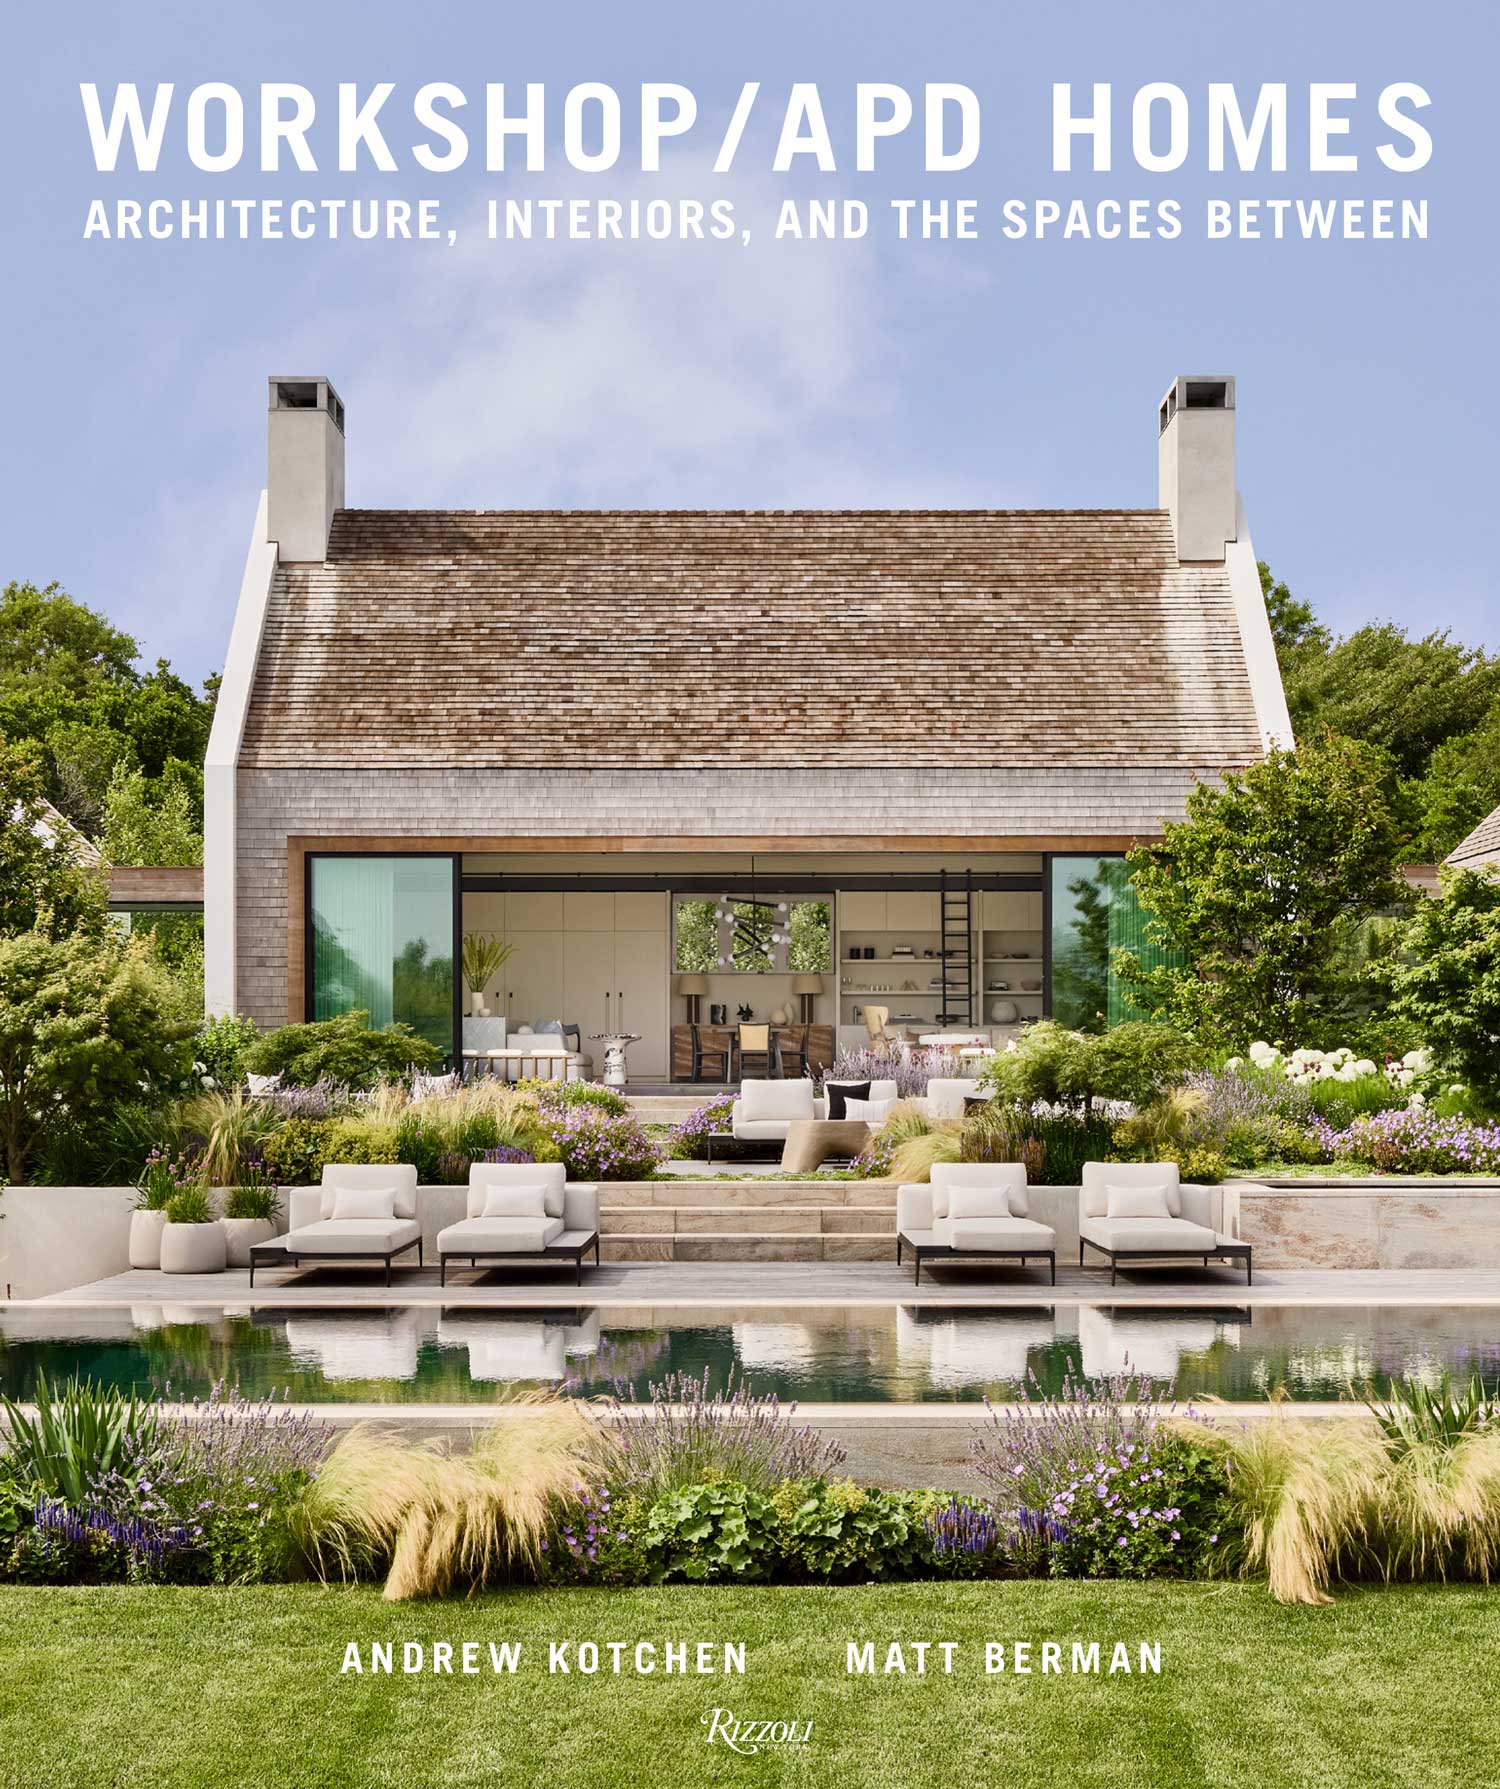 Workshop / APD Homes book cover